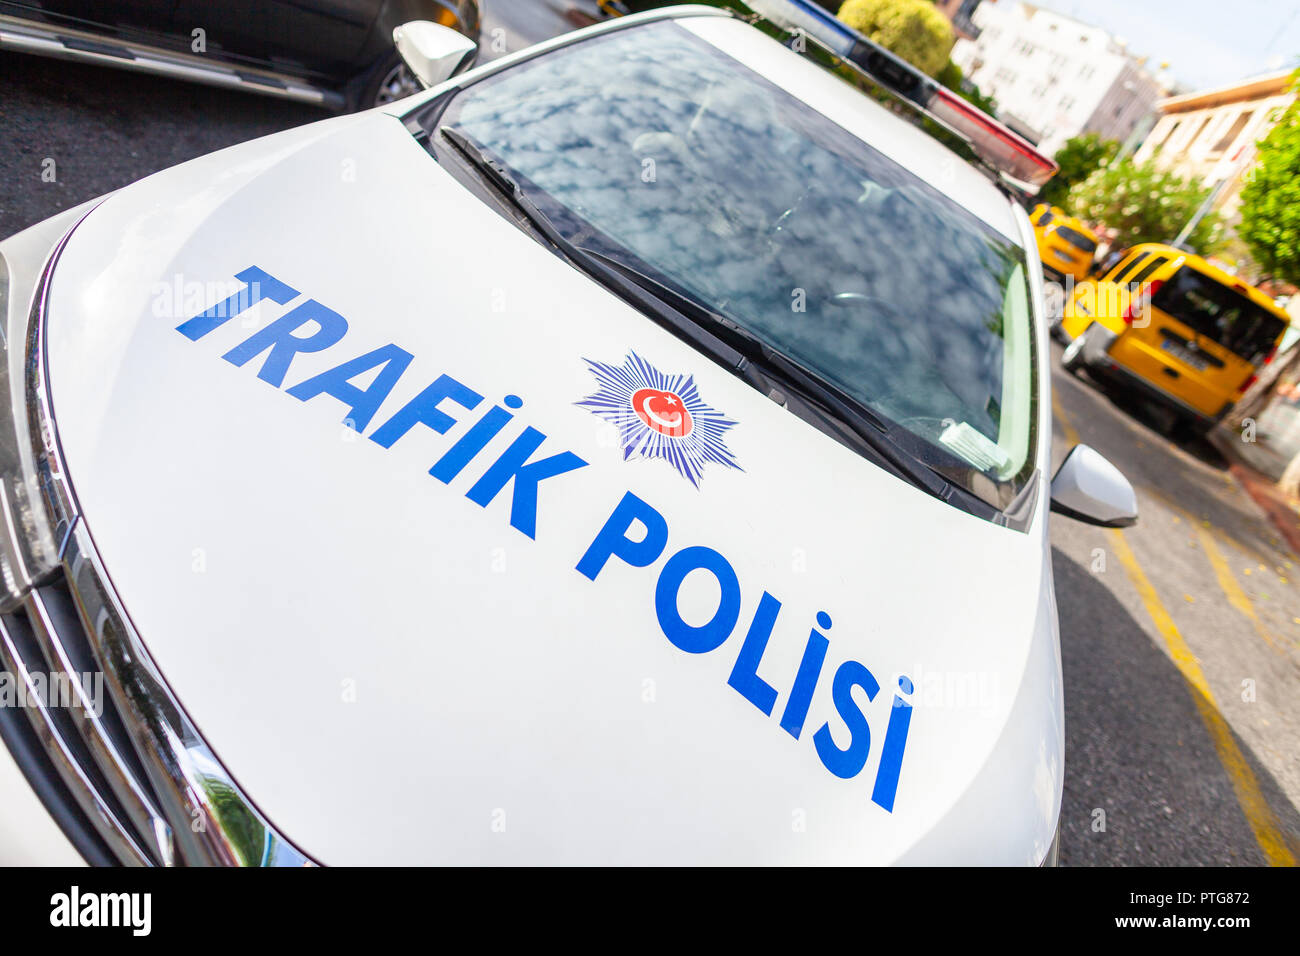 Police car from the turkish police Trafik Polisi stands on a street Stock Photo